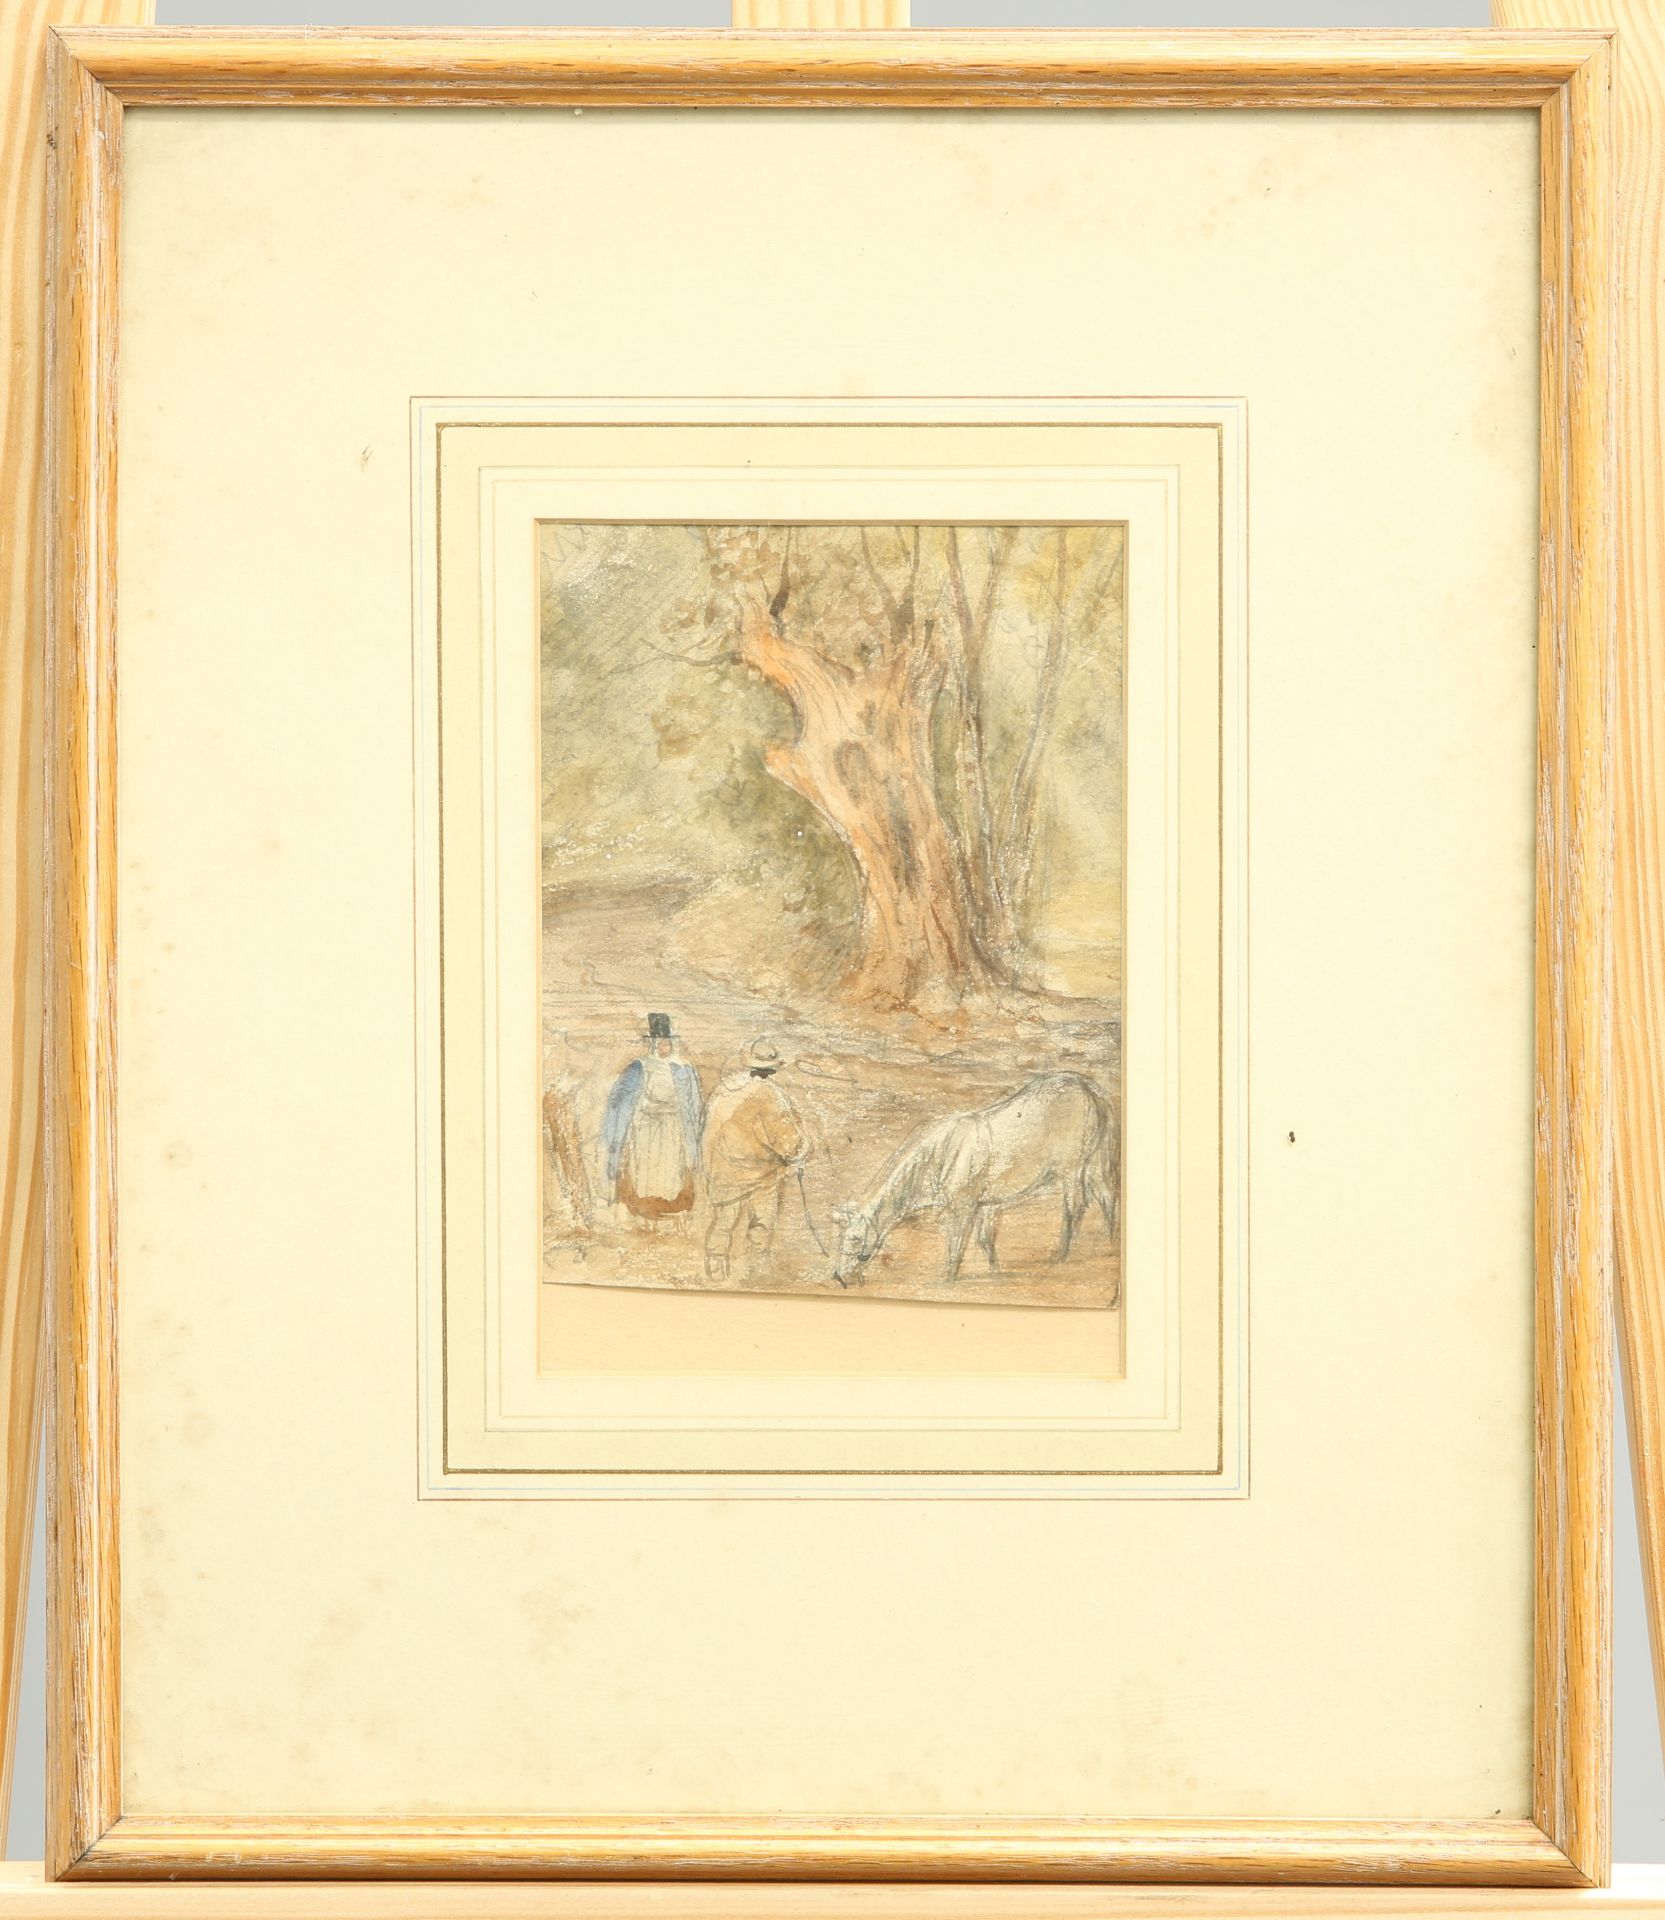 ~ ENGLISH SCHOOL, THE WELL DIGGER, dated Sept. 18. 1804 lower left, watercolour, framed, 25cm by - Image 2 of 2